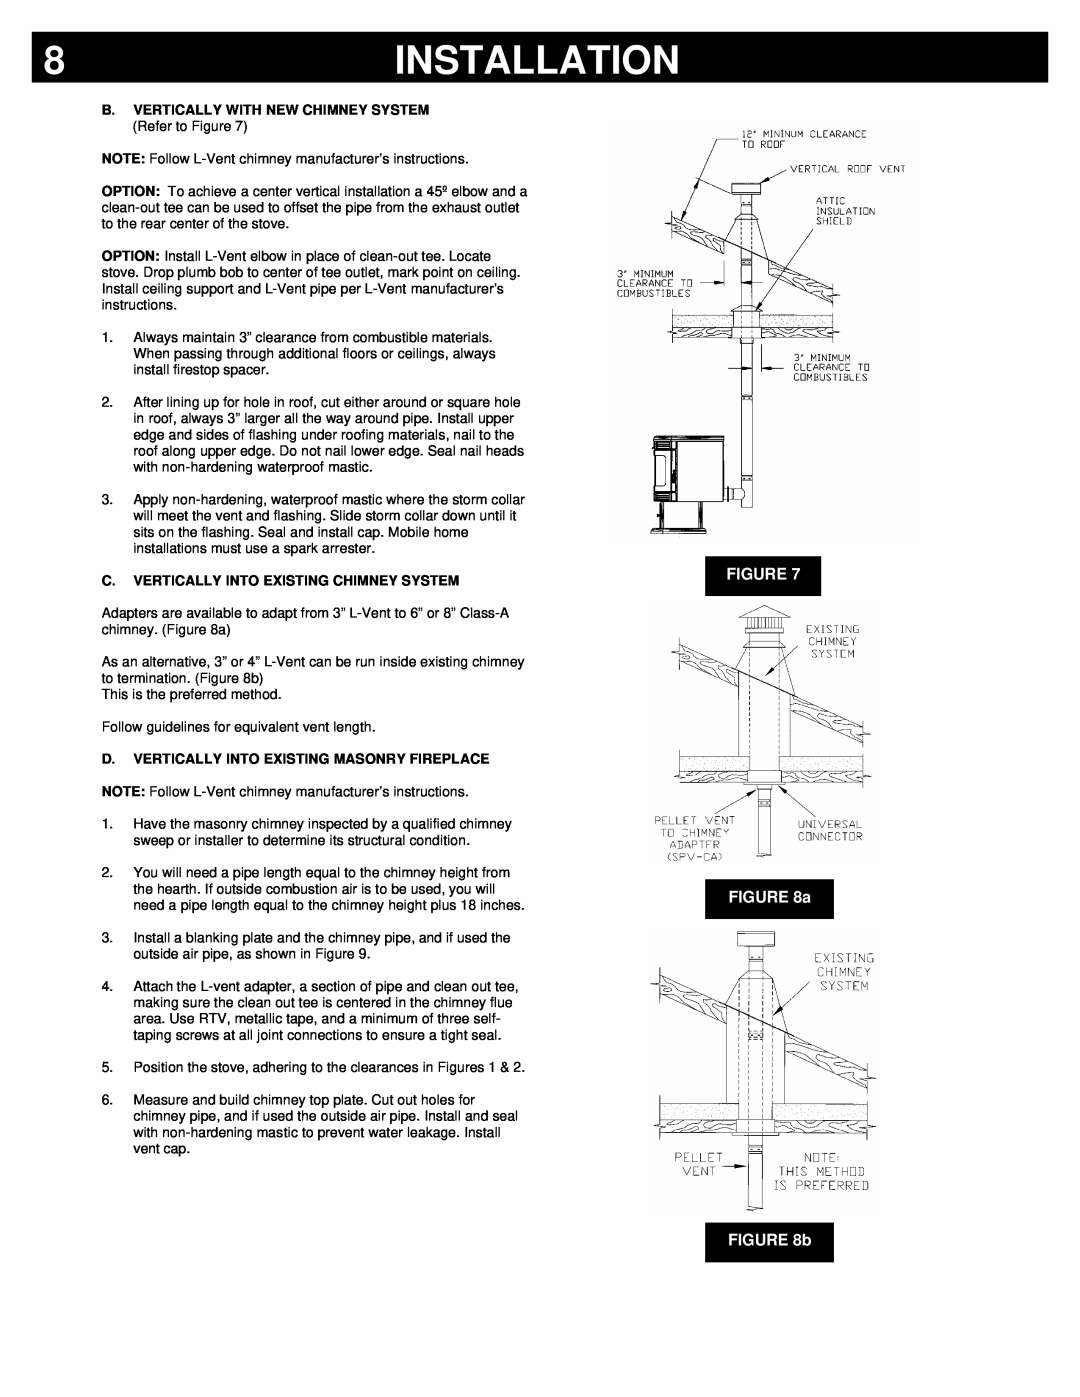 Breckwell P2700 owner manual Installation, FIGURE a b, C.Vertically Into Existing Chimney System 